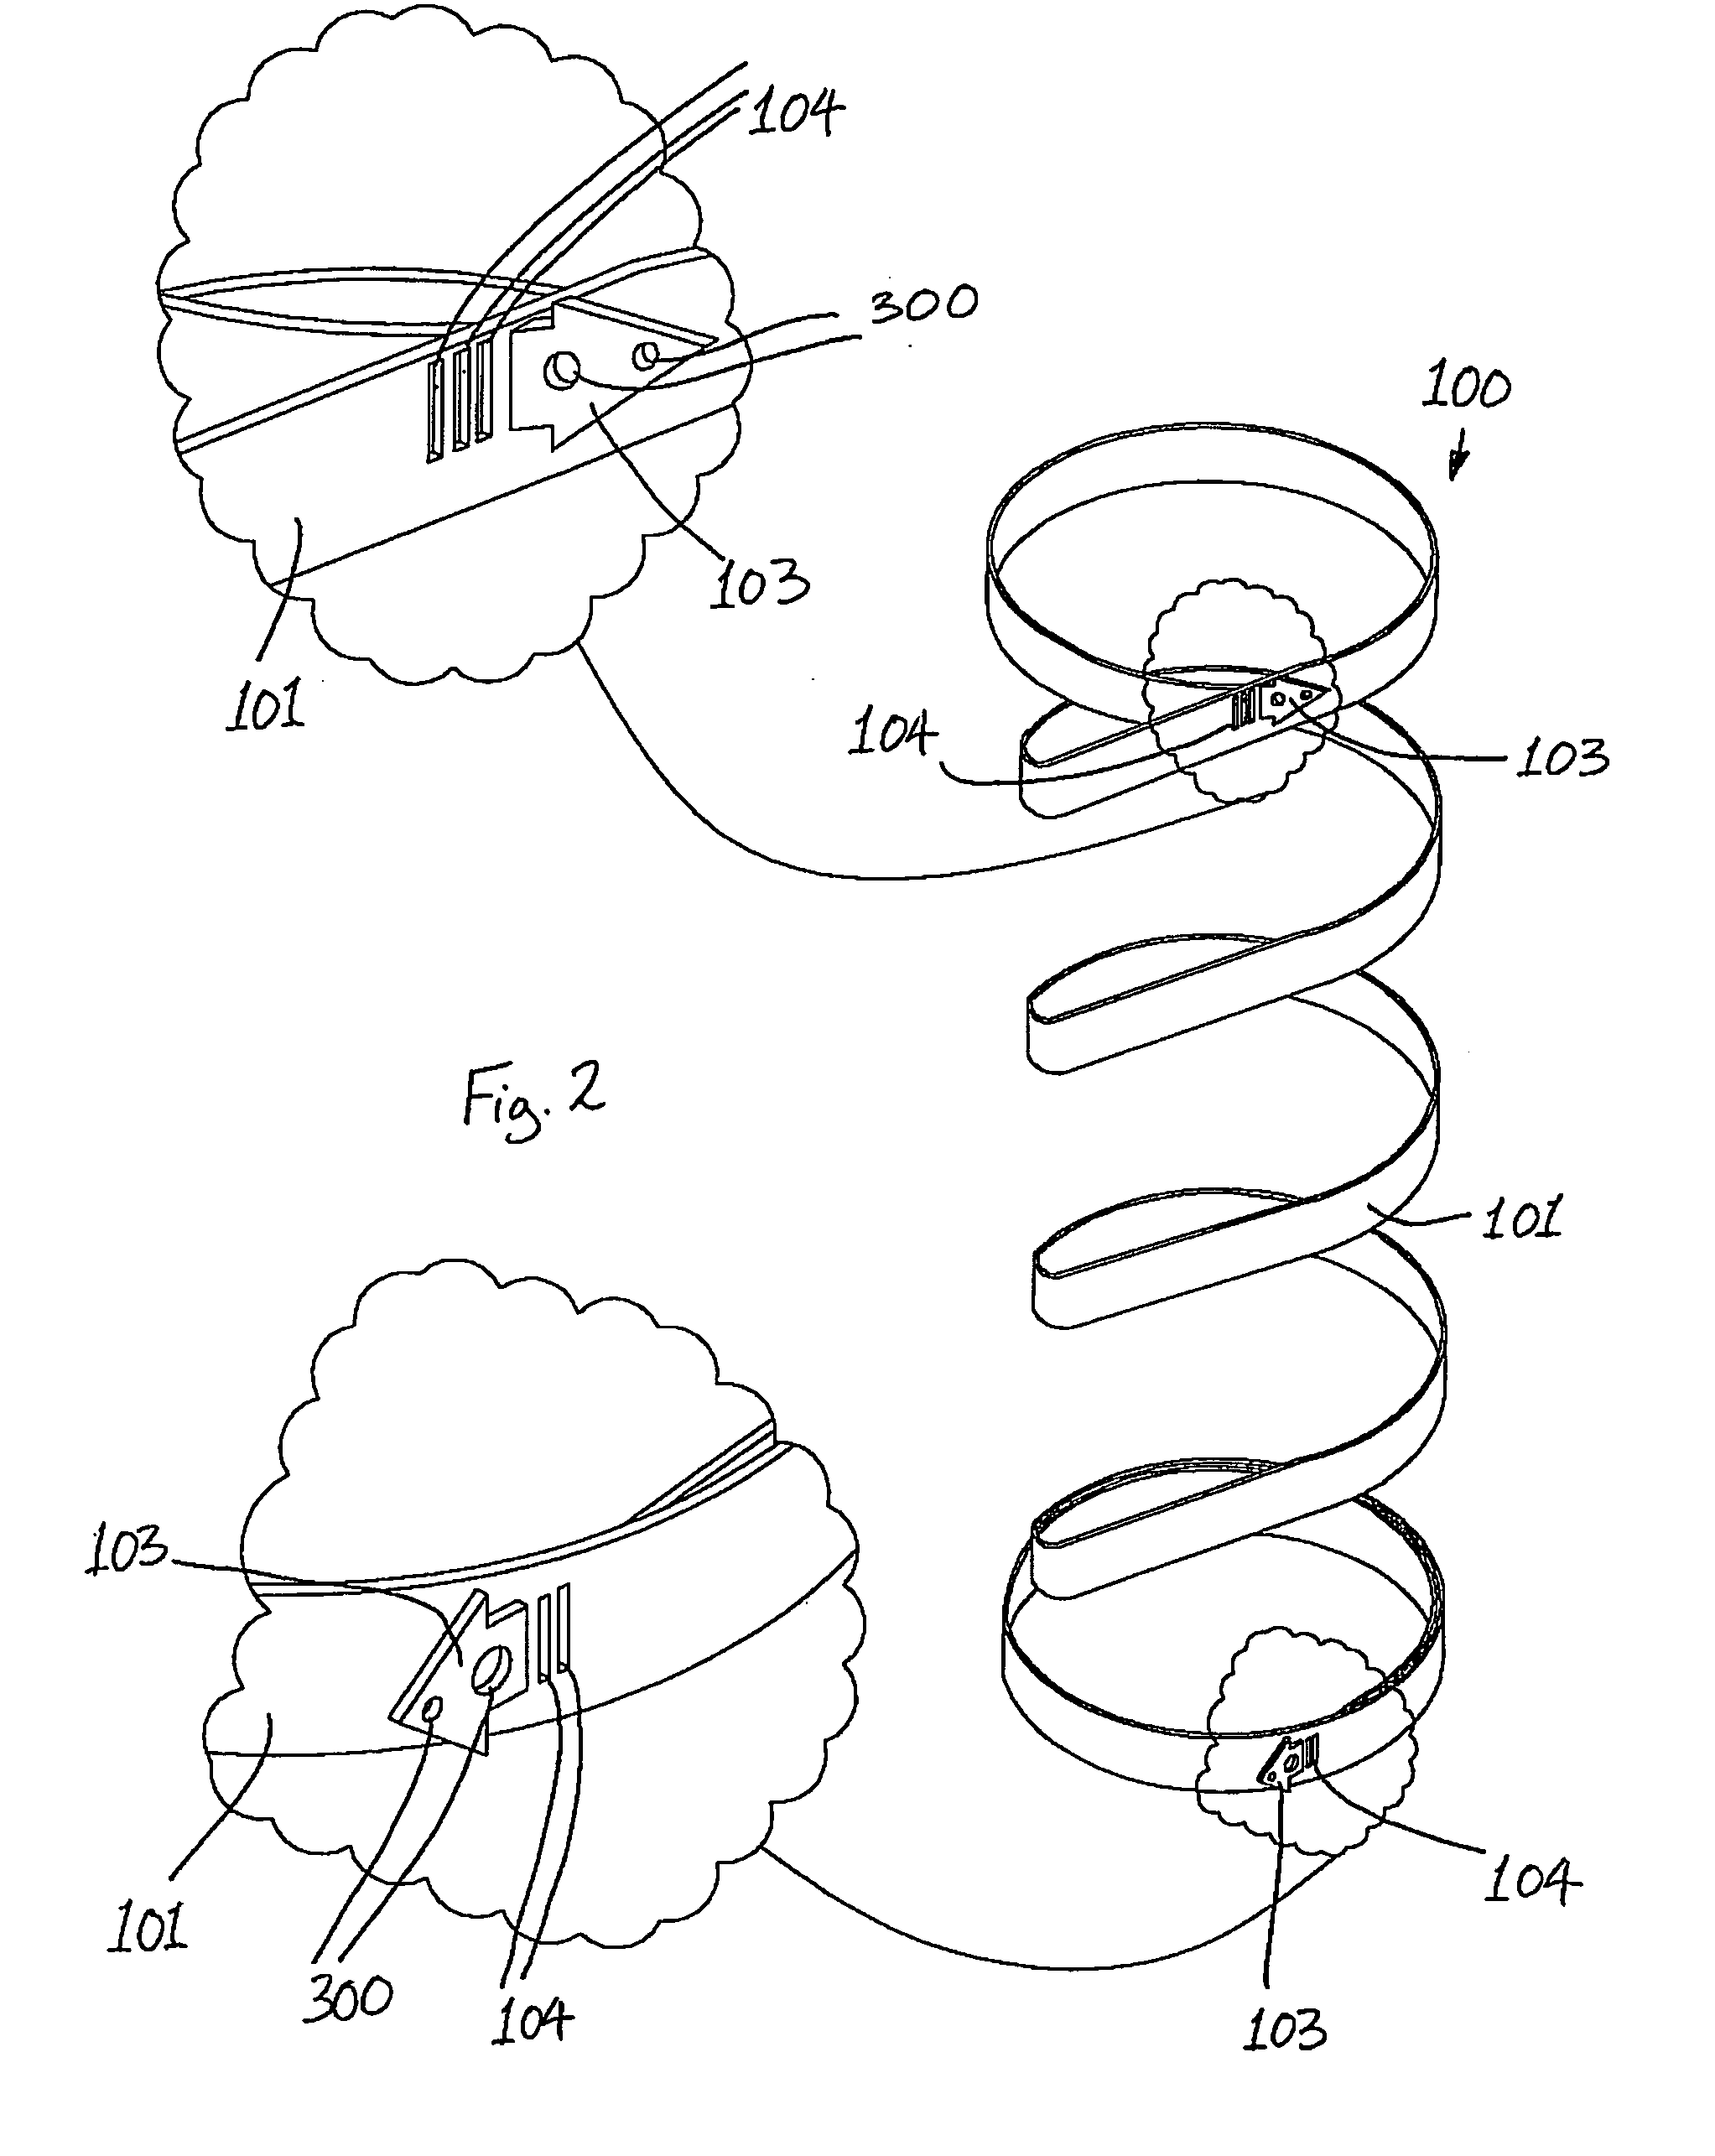 Gastric constriction device